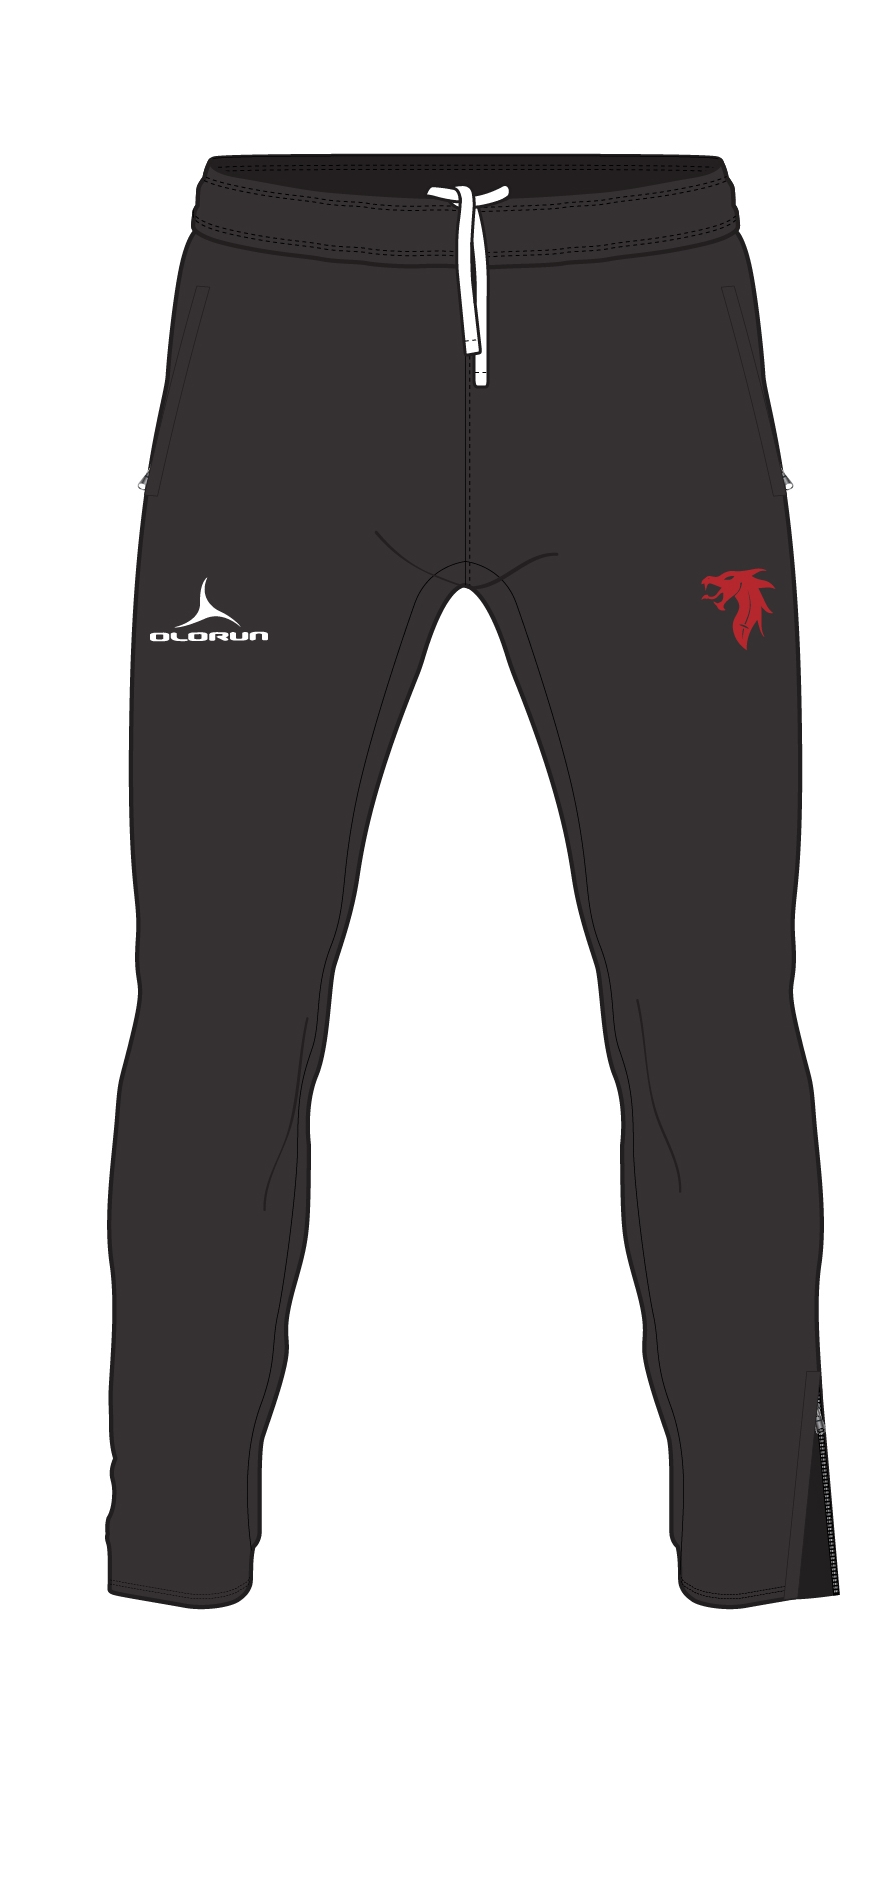 Commonwealth Tracksuit Bottoms